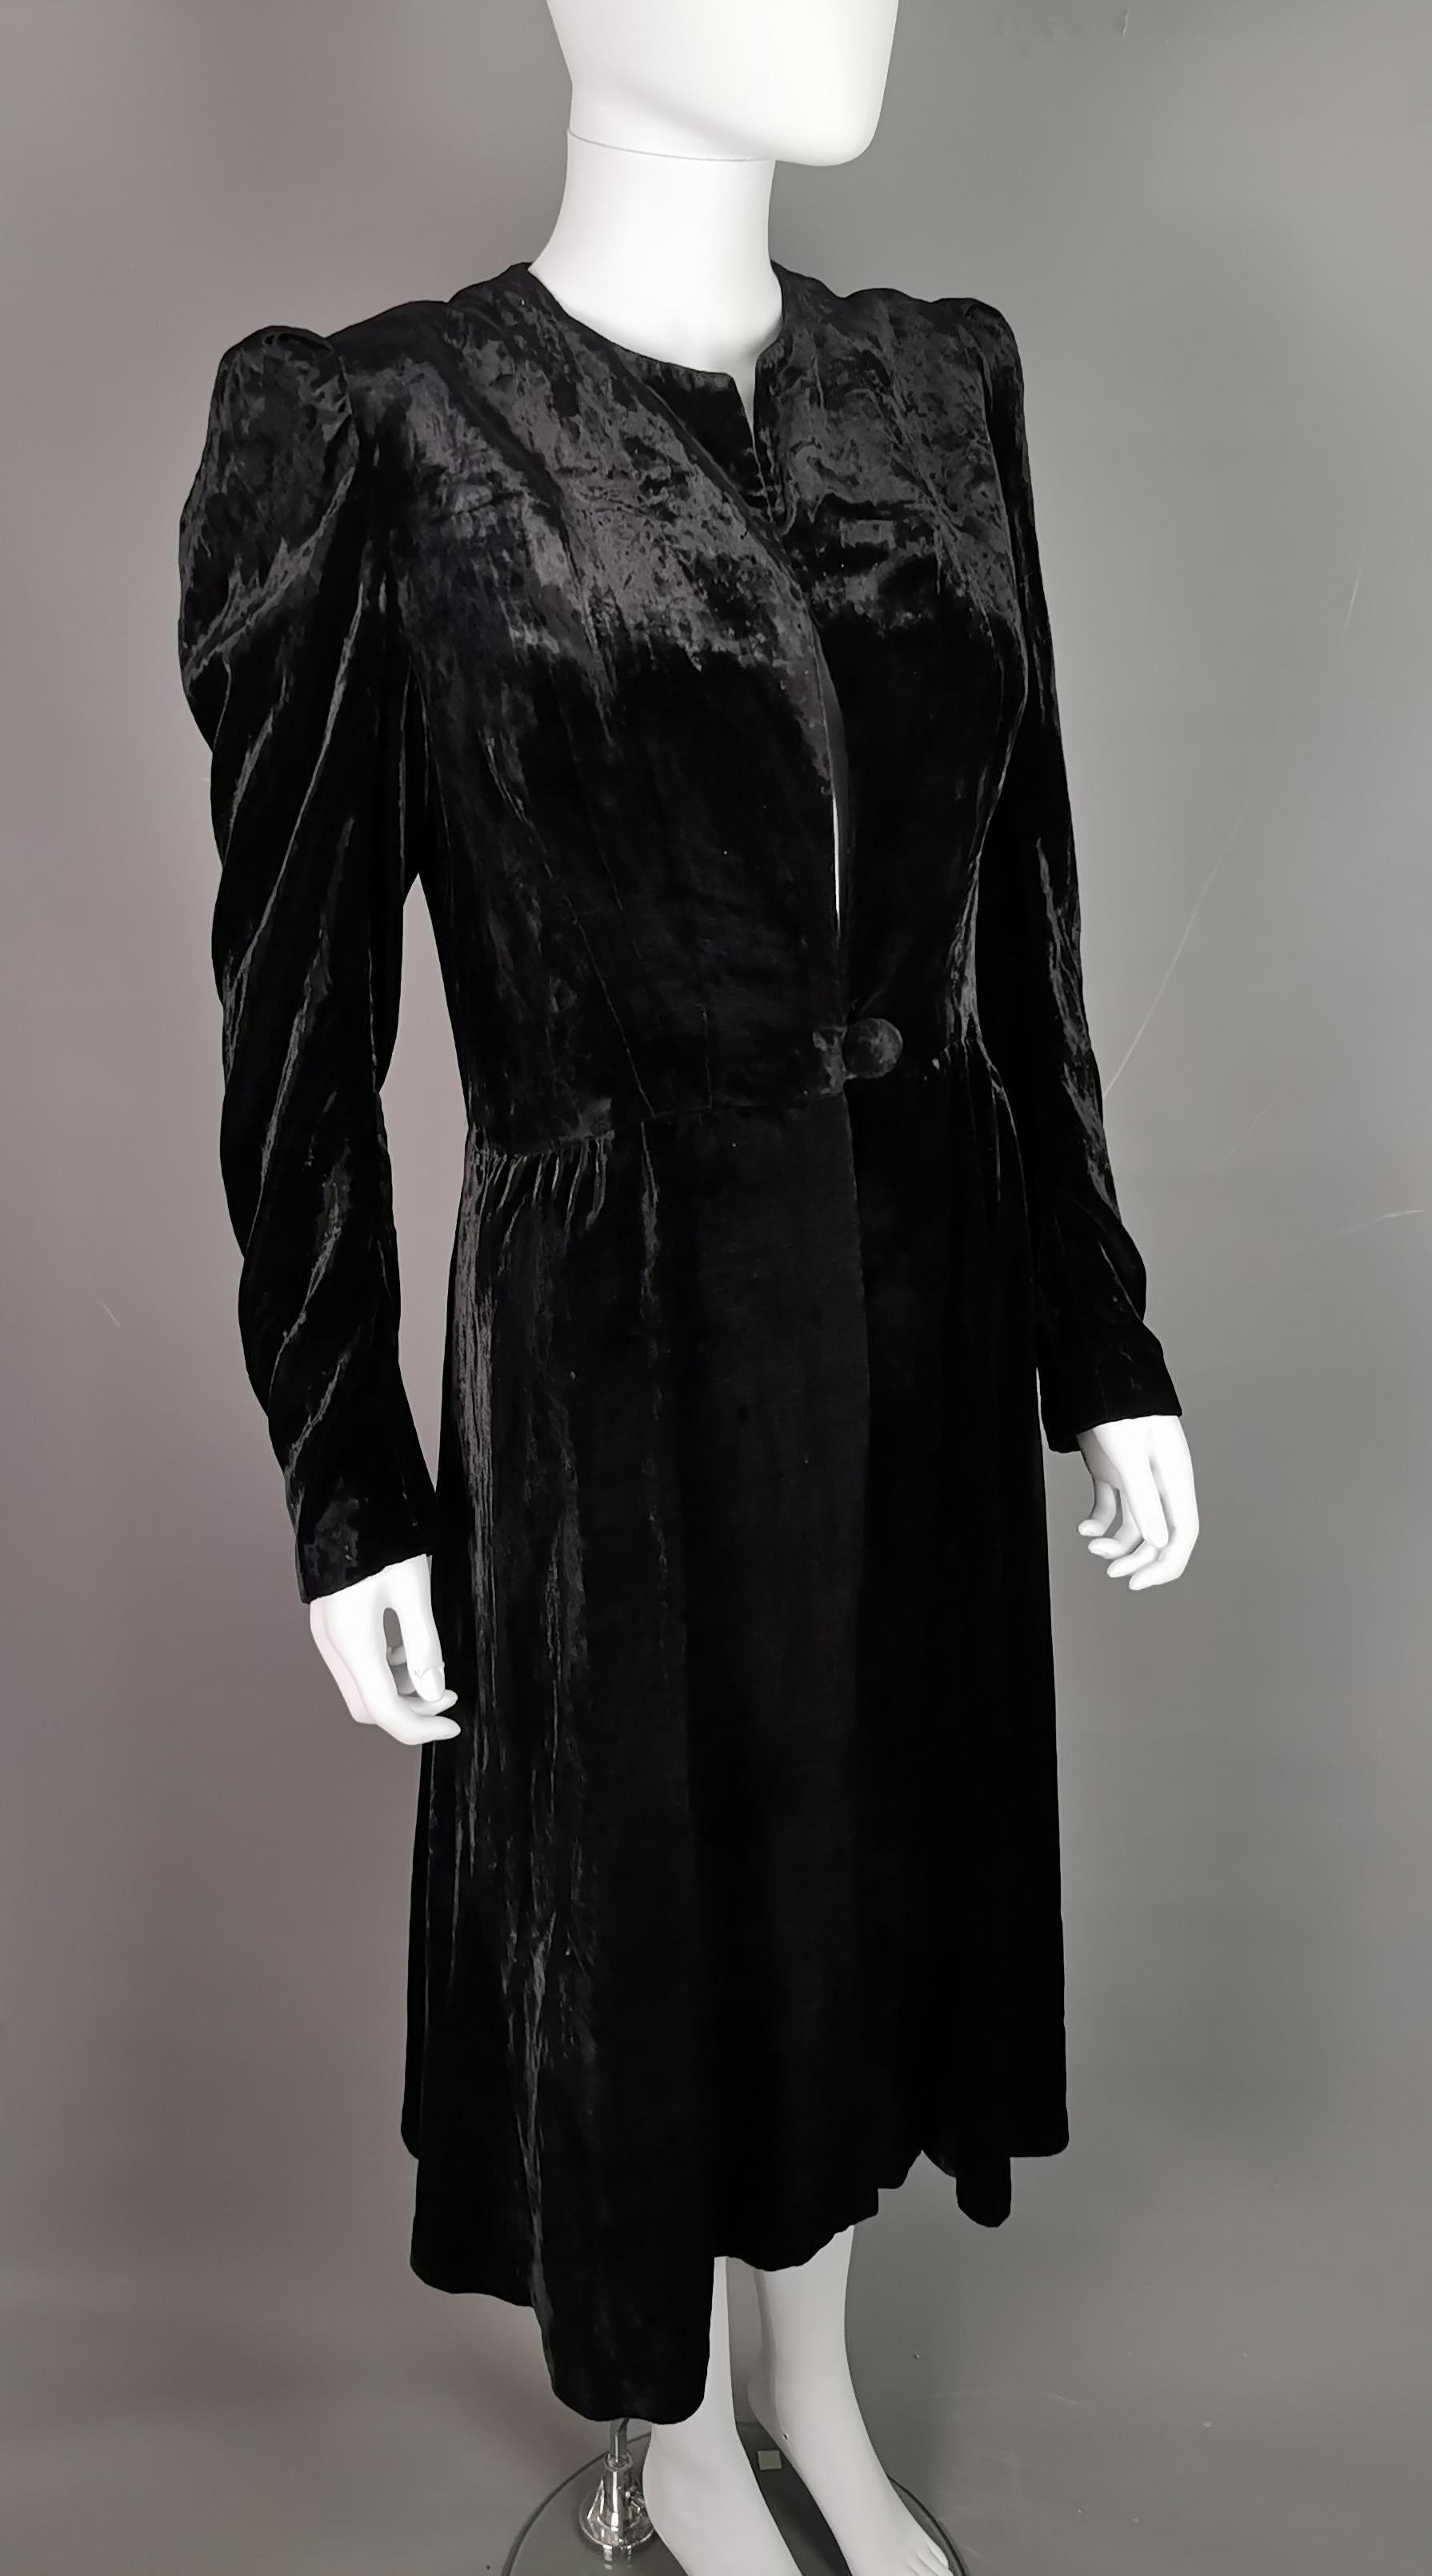 Stunning and sumptuous is the only way to describe this amazingly beautiful late 1930's rich velvet opera coat.

This beauty is made from a super soft silk velvet blend with a cotton blend lining.

It is slightly cinched in at the waist with ruching